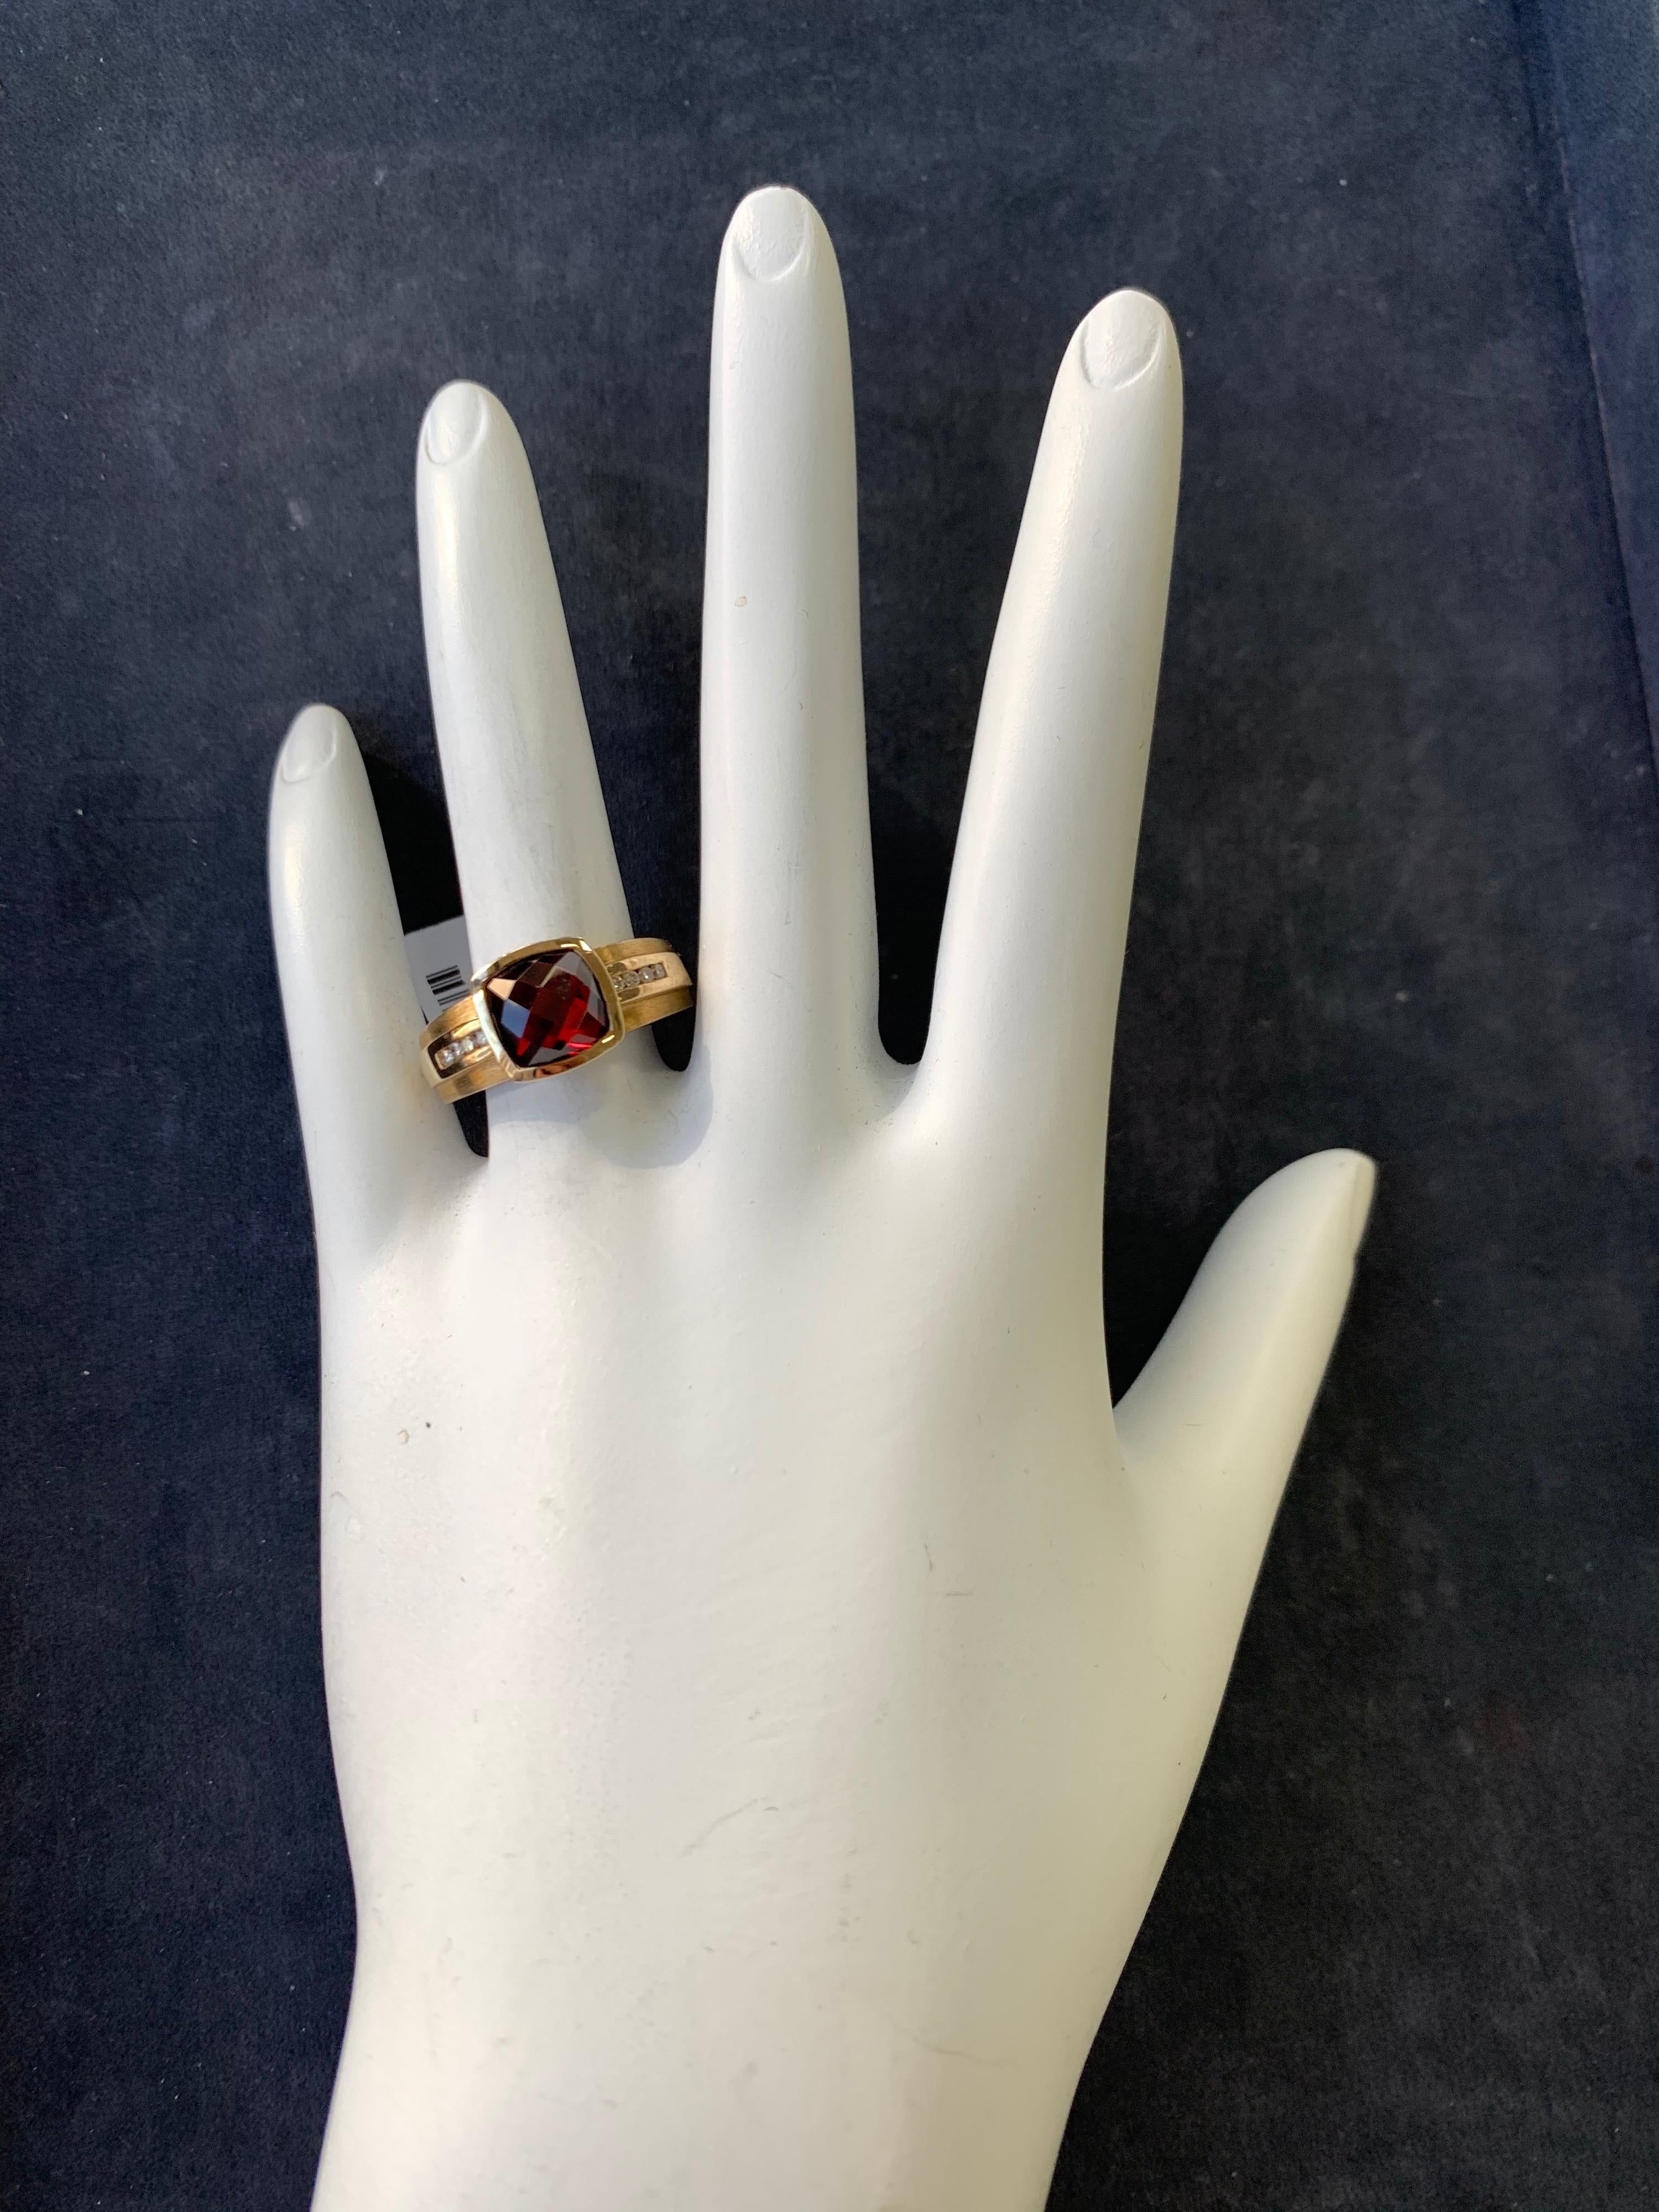 A stunning 14k yellow gold ring. The natural garnet weighs 3.41 carat and measures approx 7.5x8.2mm and is cut with a checkerboard pattern. Included are 8 natural round brilliant diamonds weighing 0.14 carats and the ring is a size 6.25. Total